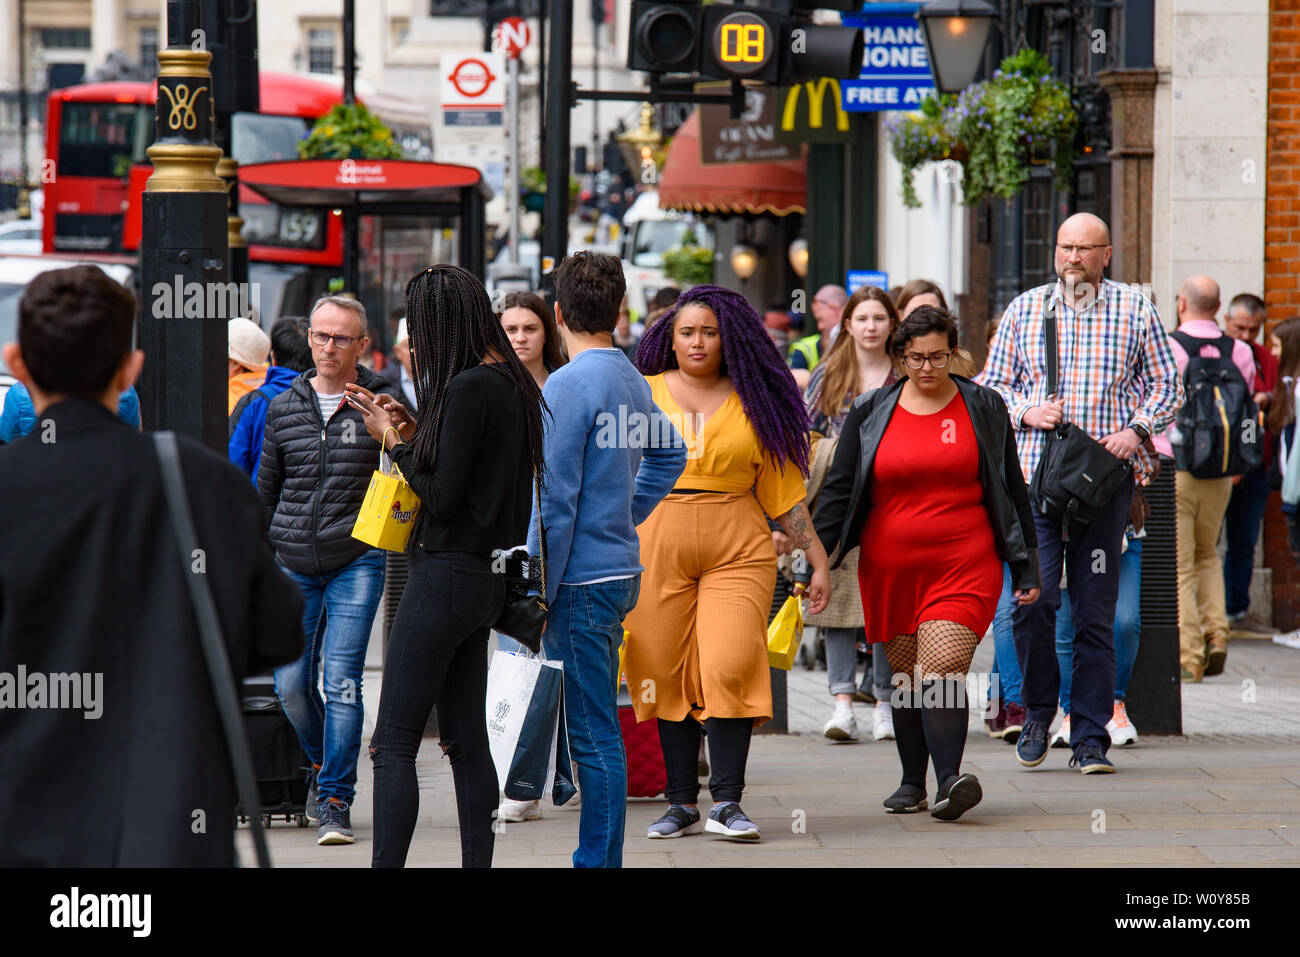 People walking on Parliament St in London, United Kingdom Stock Photo